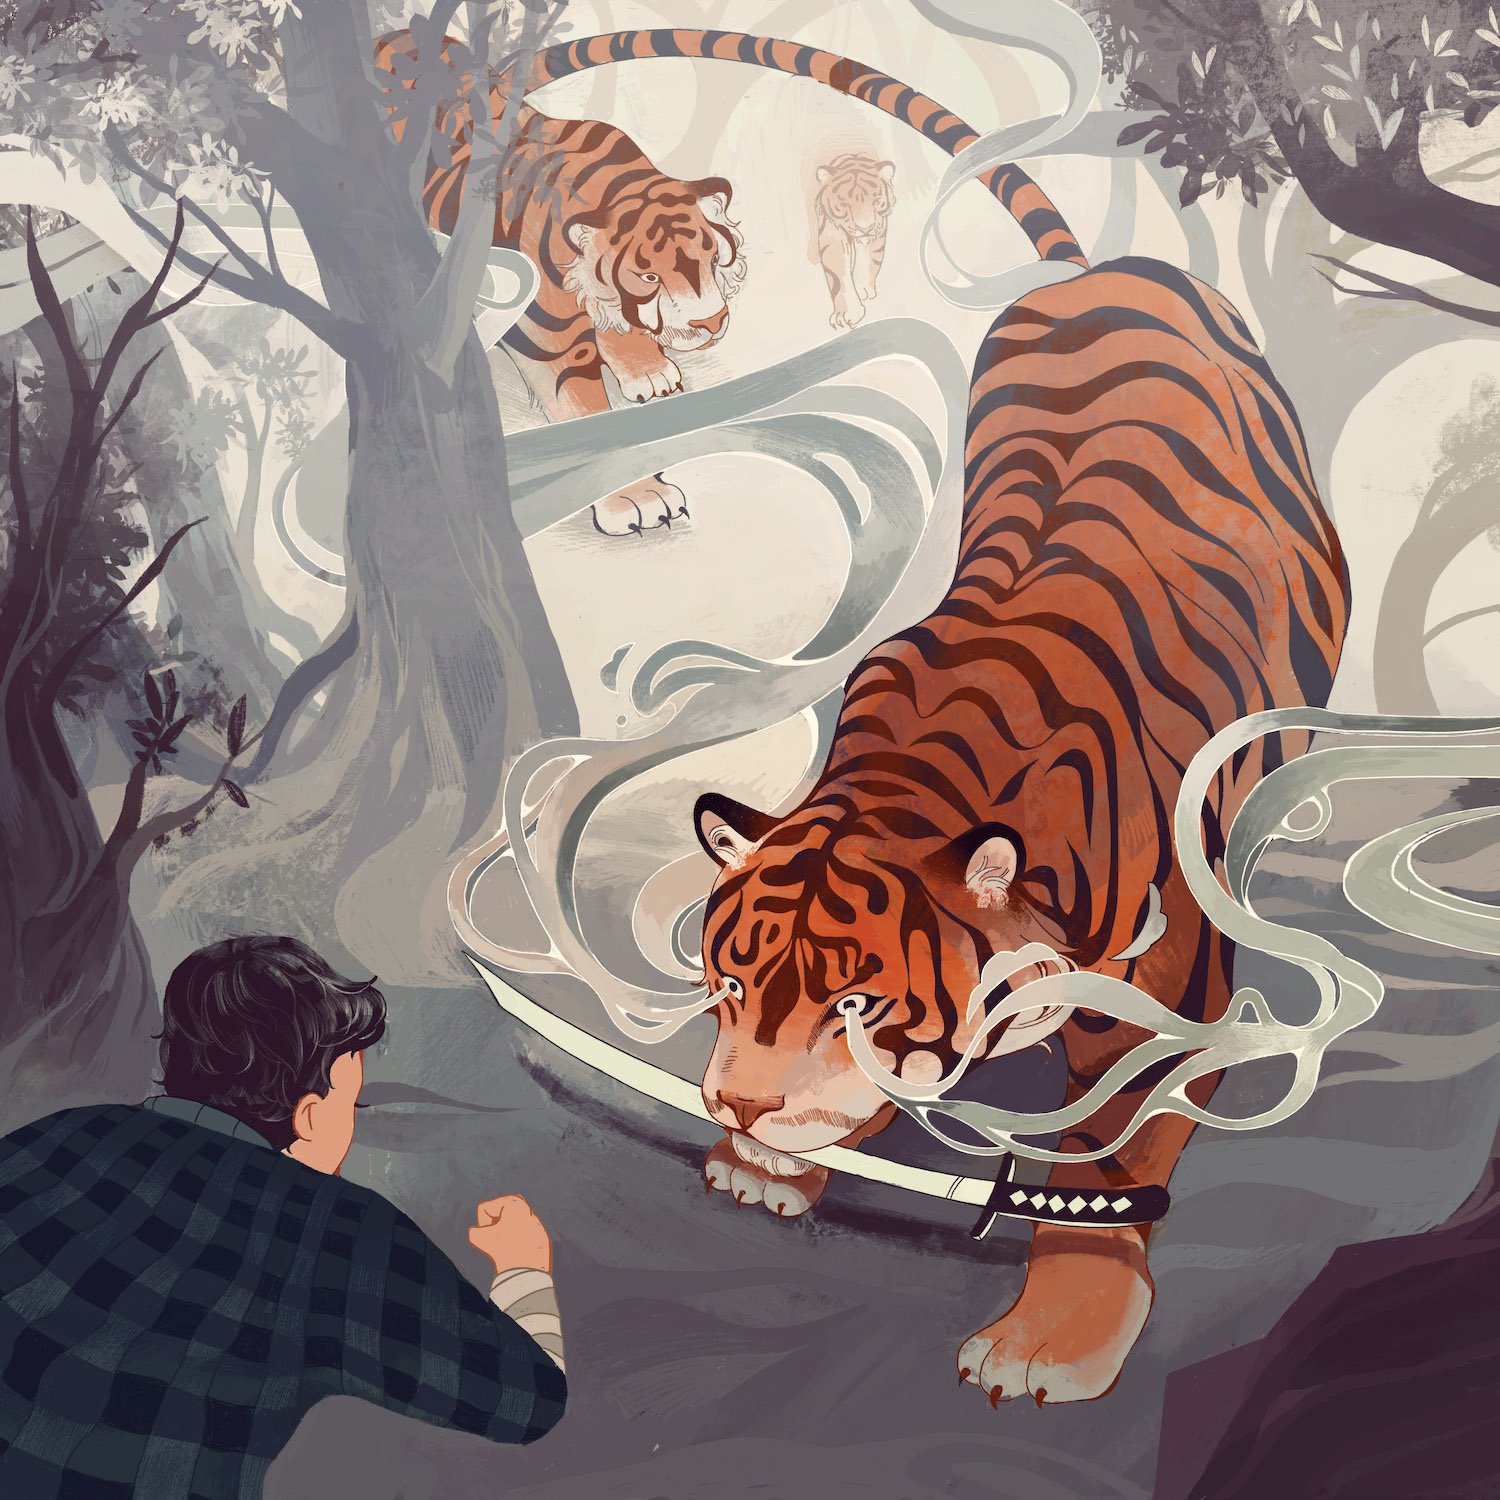 In a misty forest, a man in flannel assumes a fighting stance against a pack a tigers. The lead tiger has a katana in its mouth, and smoke wisps from its eyes.